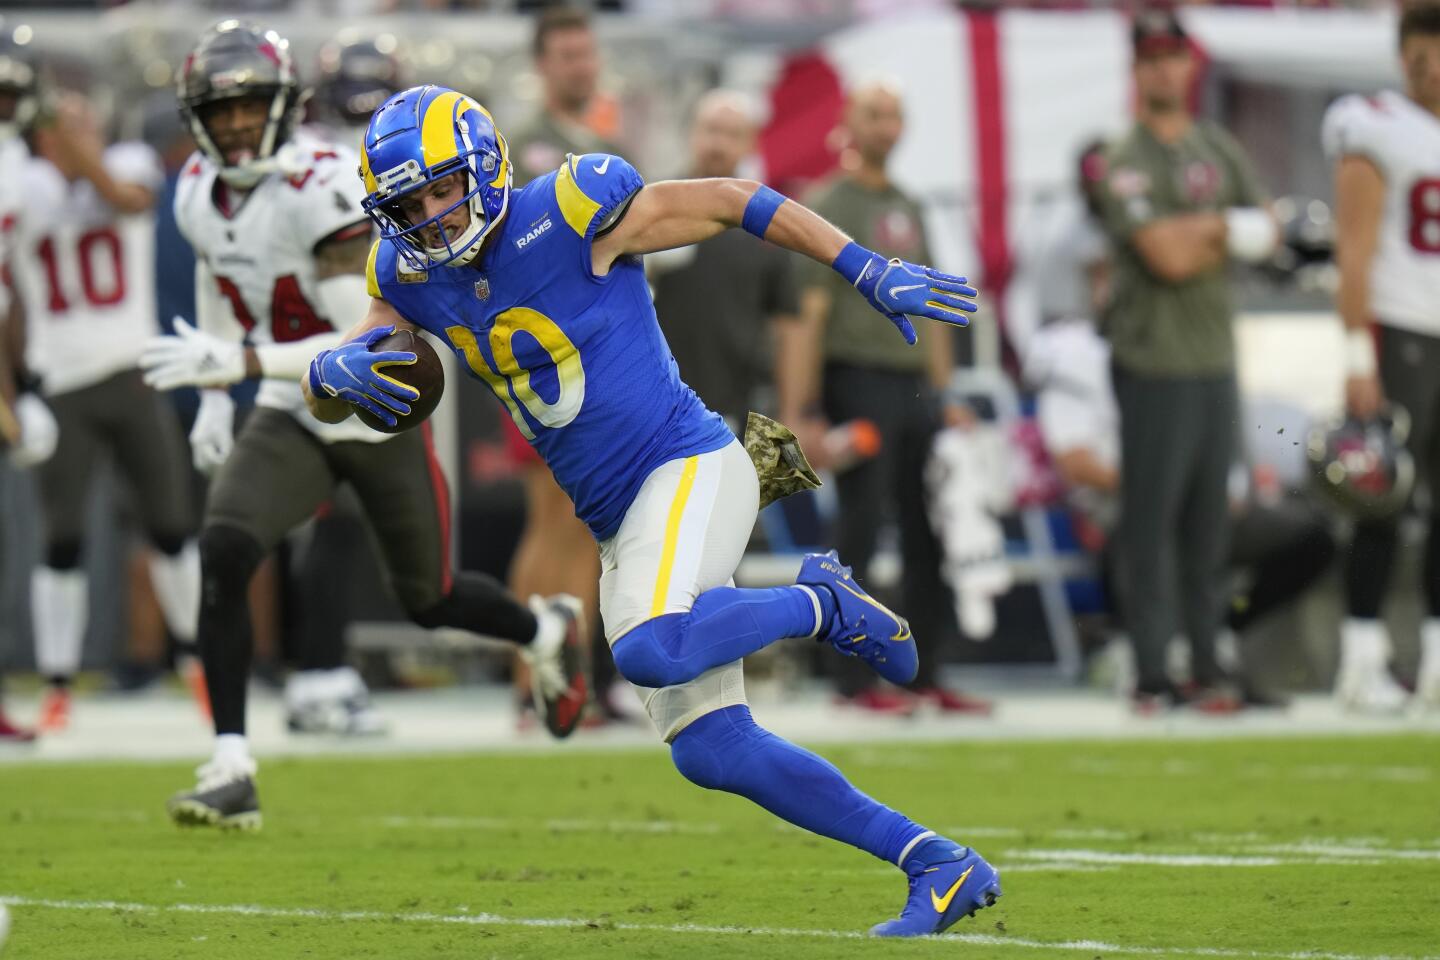 Los Angeles Rams wide receiver Cooper Kupp (10) runs to the end zone for a 69-yard touchdown reception during the first half of an NFL football game between the Los Angeles Rams and Tampa Bay Buccaneers, Sunday, Nov. 6, 2022, in Tampa, Fla. (AP Photo/Chris O'Meara)